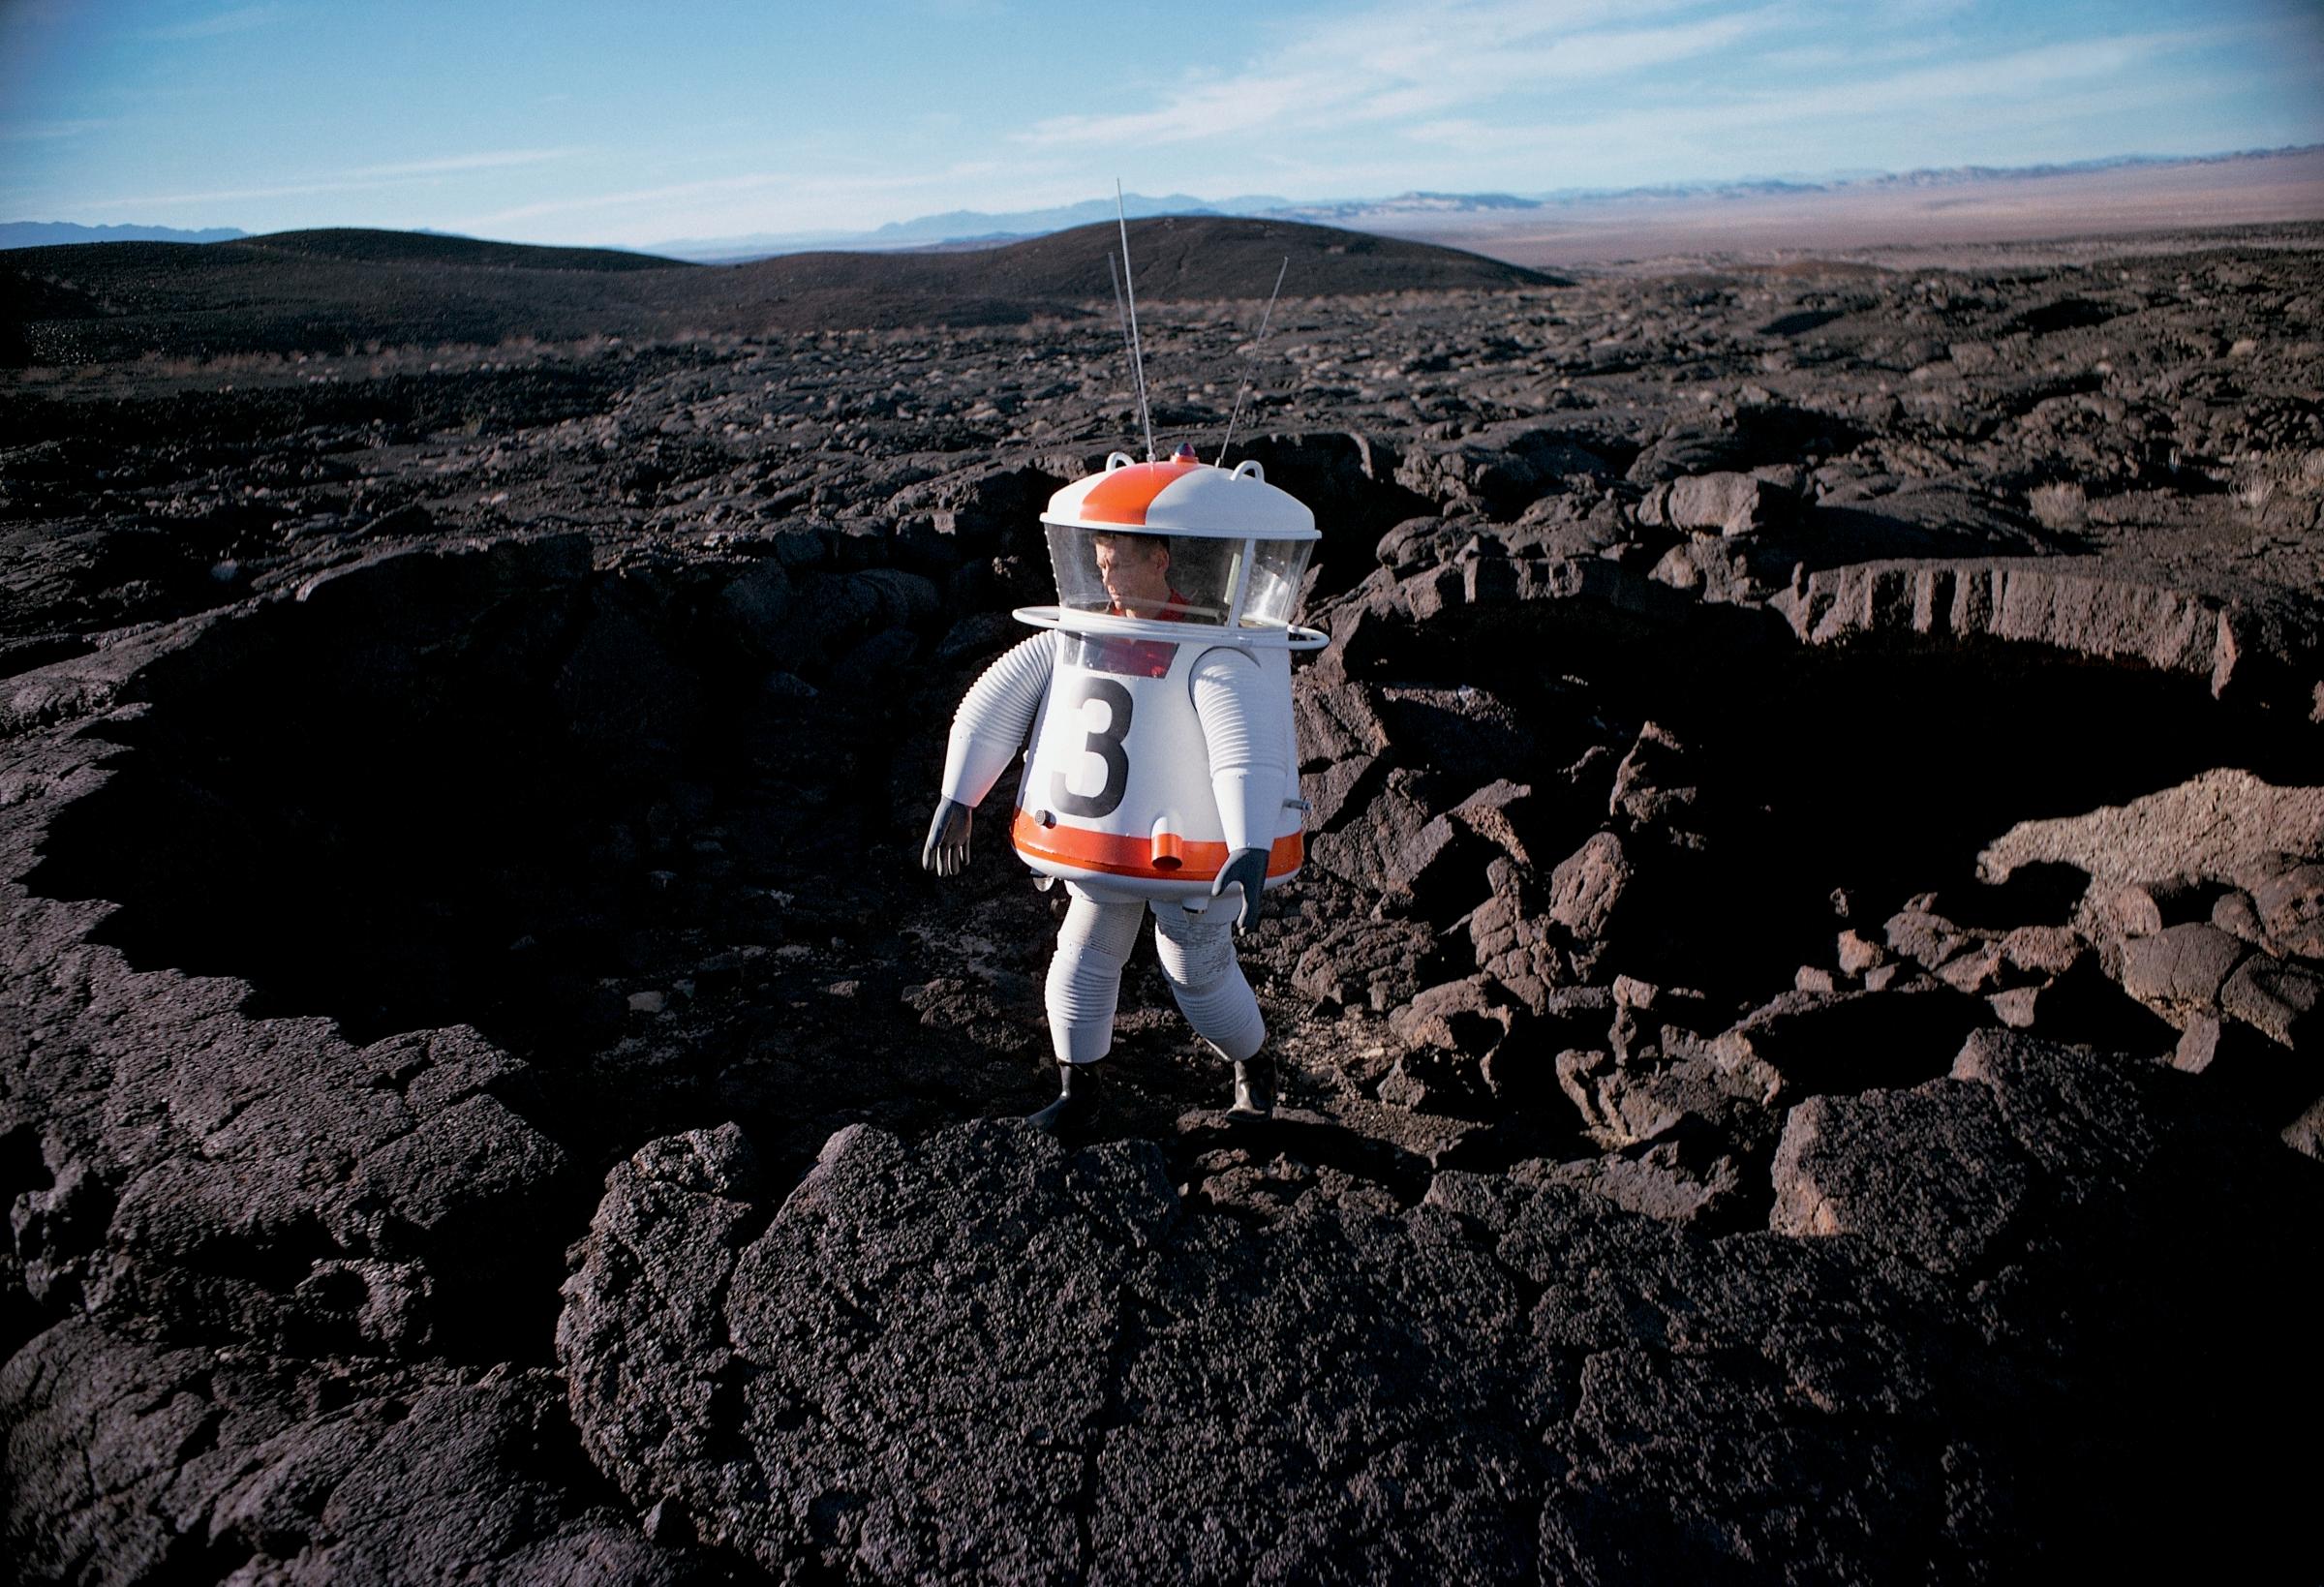 Allyn Hazard tests his "moon suit mock-up" in a lava crater in the Mojave Desert for the April 27, 1962 issue of LIFE.